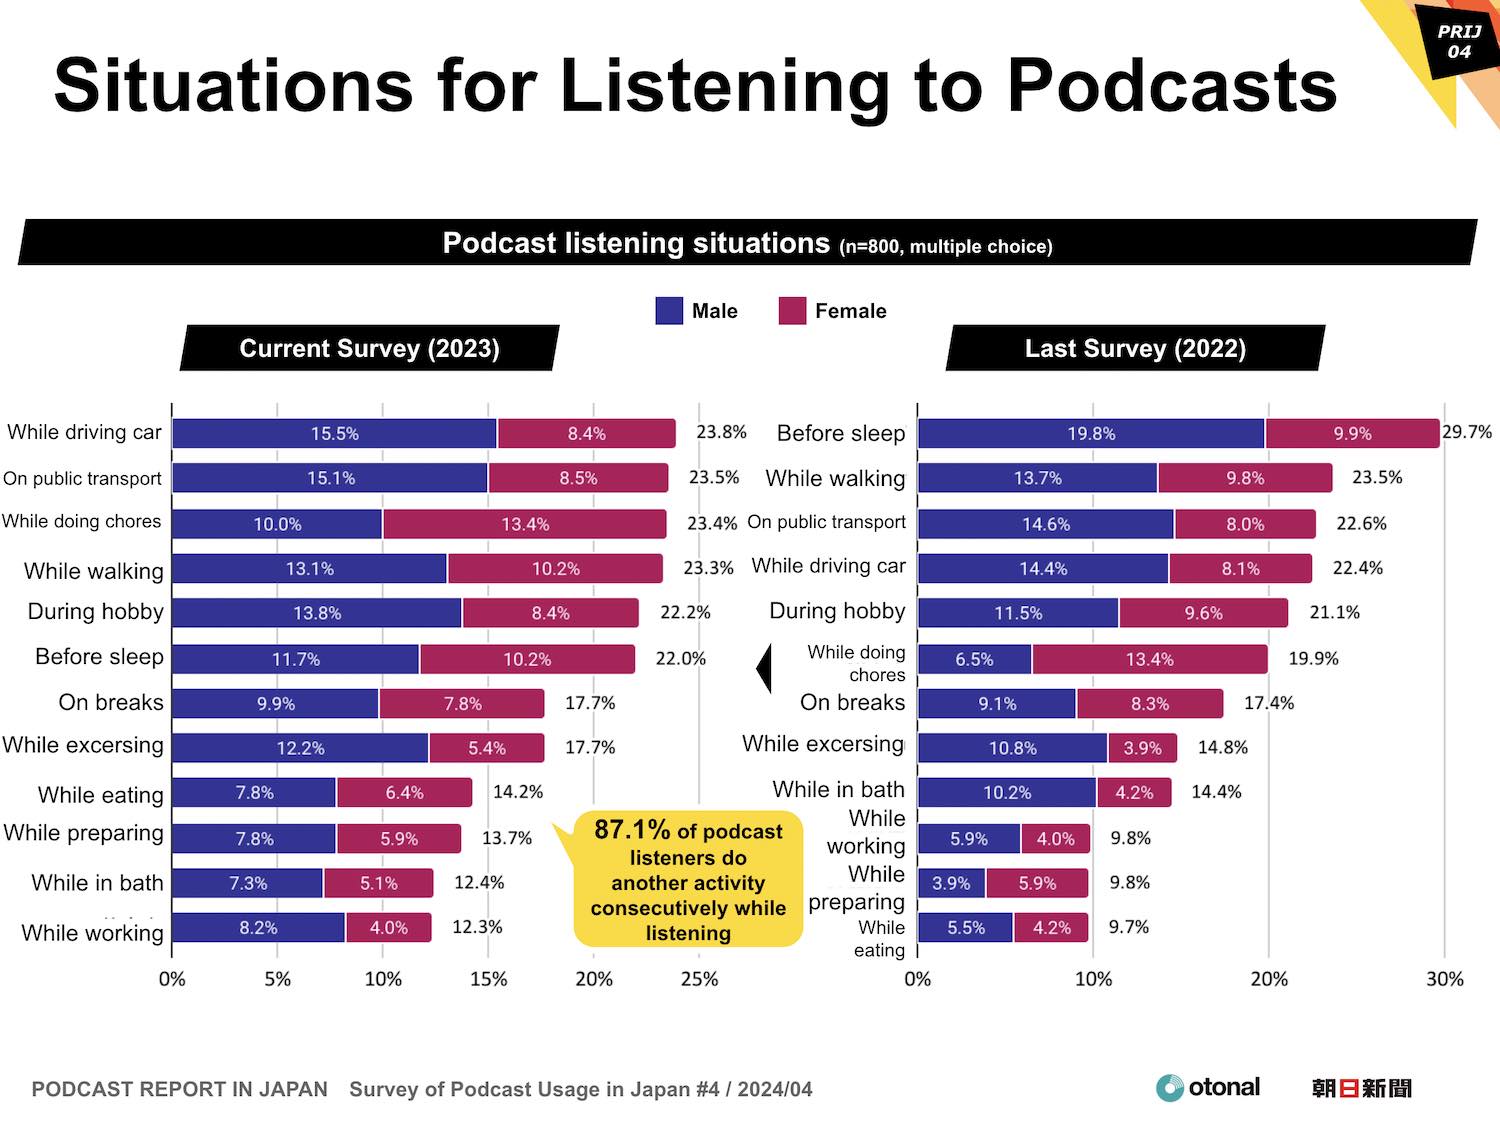 PODCAST REPORT IN JAPAN Survey of Podcast Usage in Japan #4